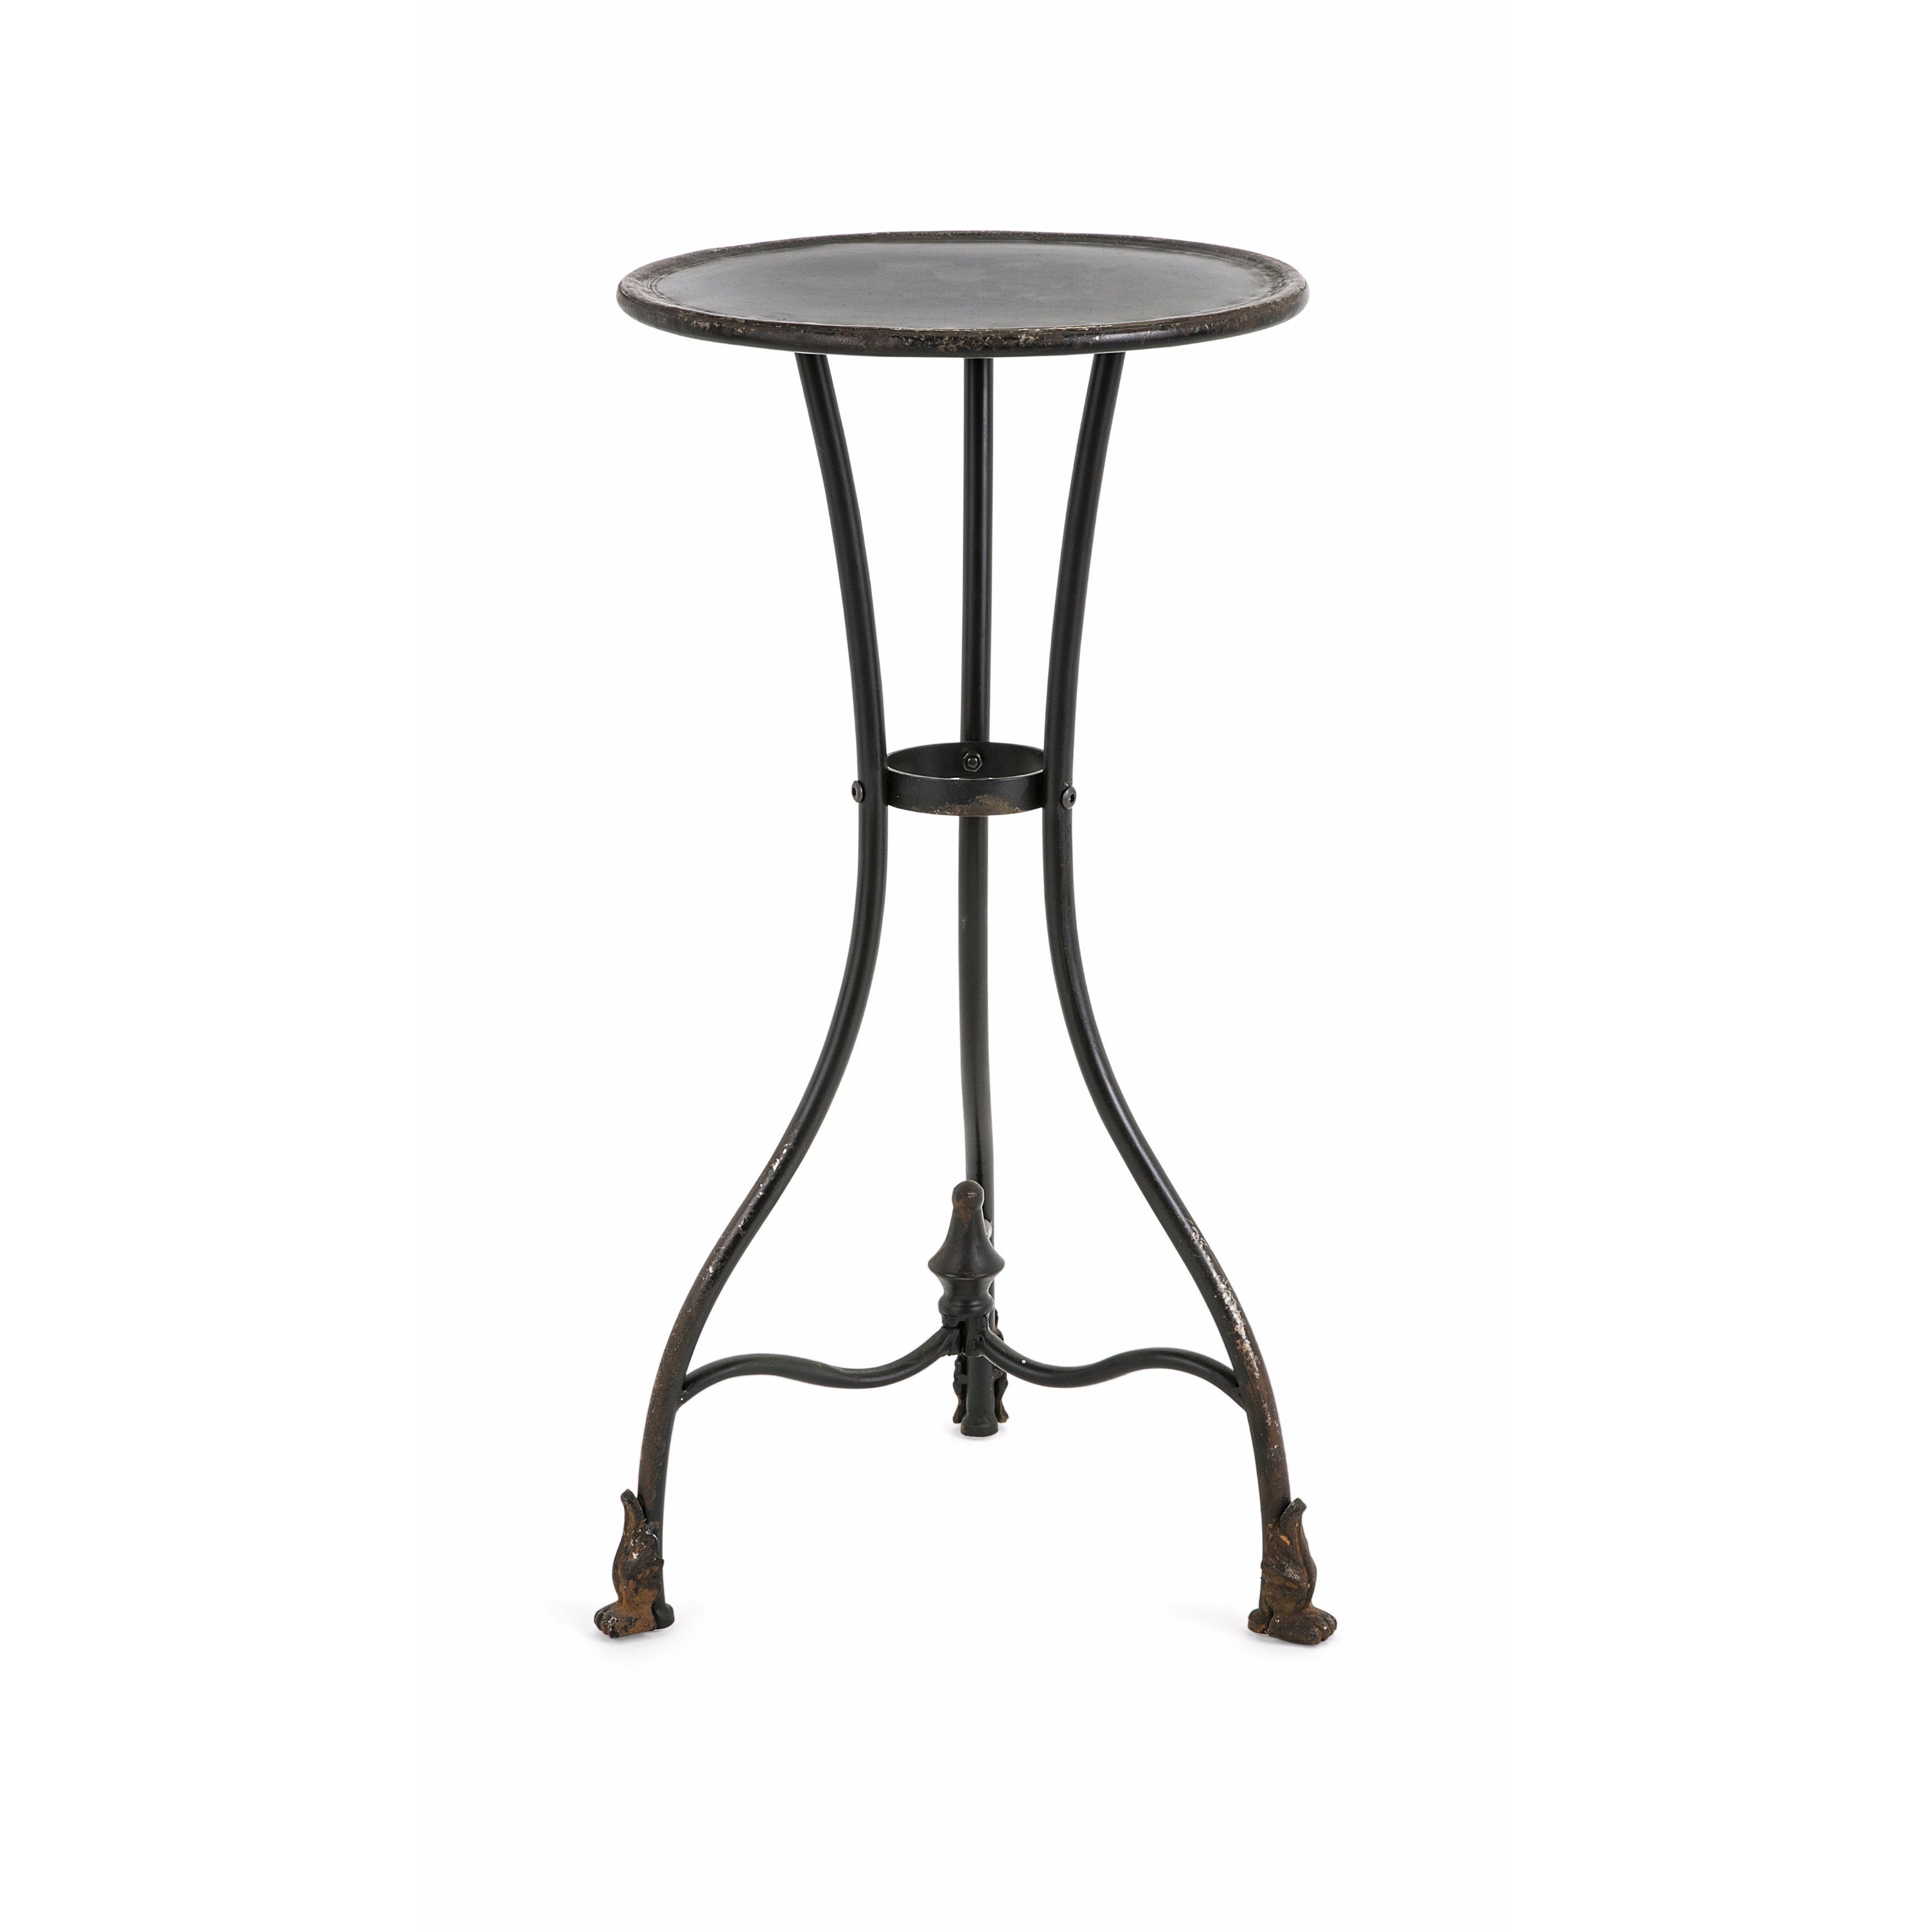 cliffton small metal accent table free shipping today door chest retro designer furniture green glass lamp tables for living room round silver side teak kitchen dining and chairs